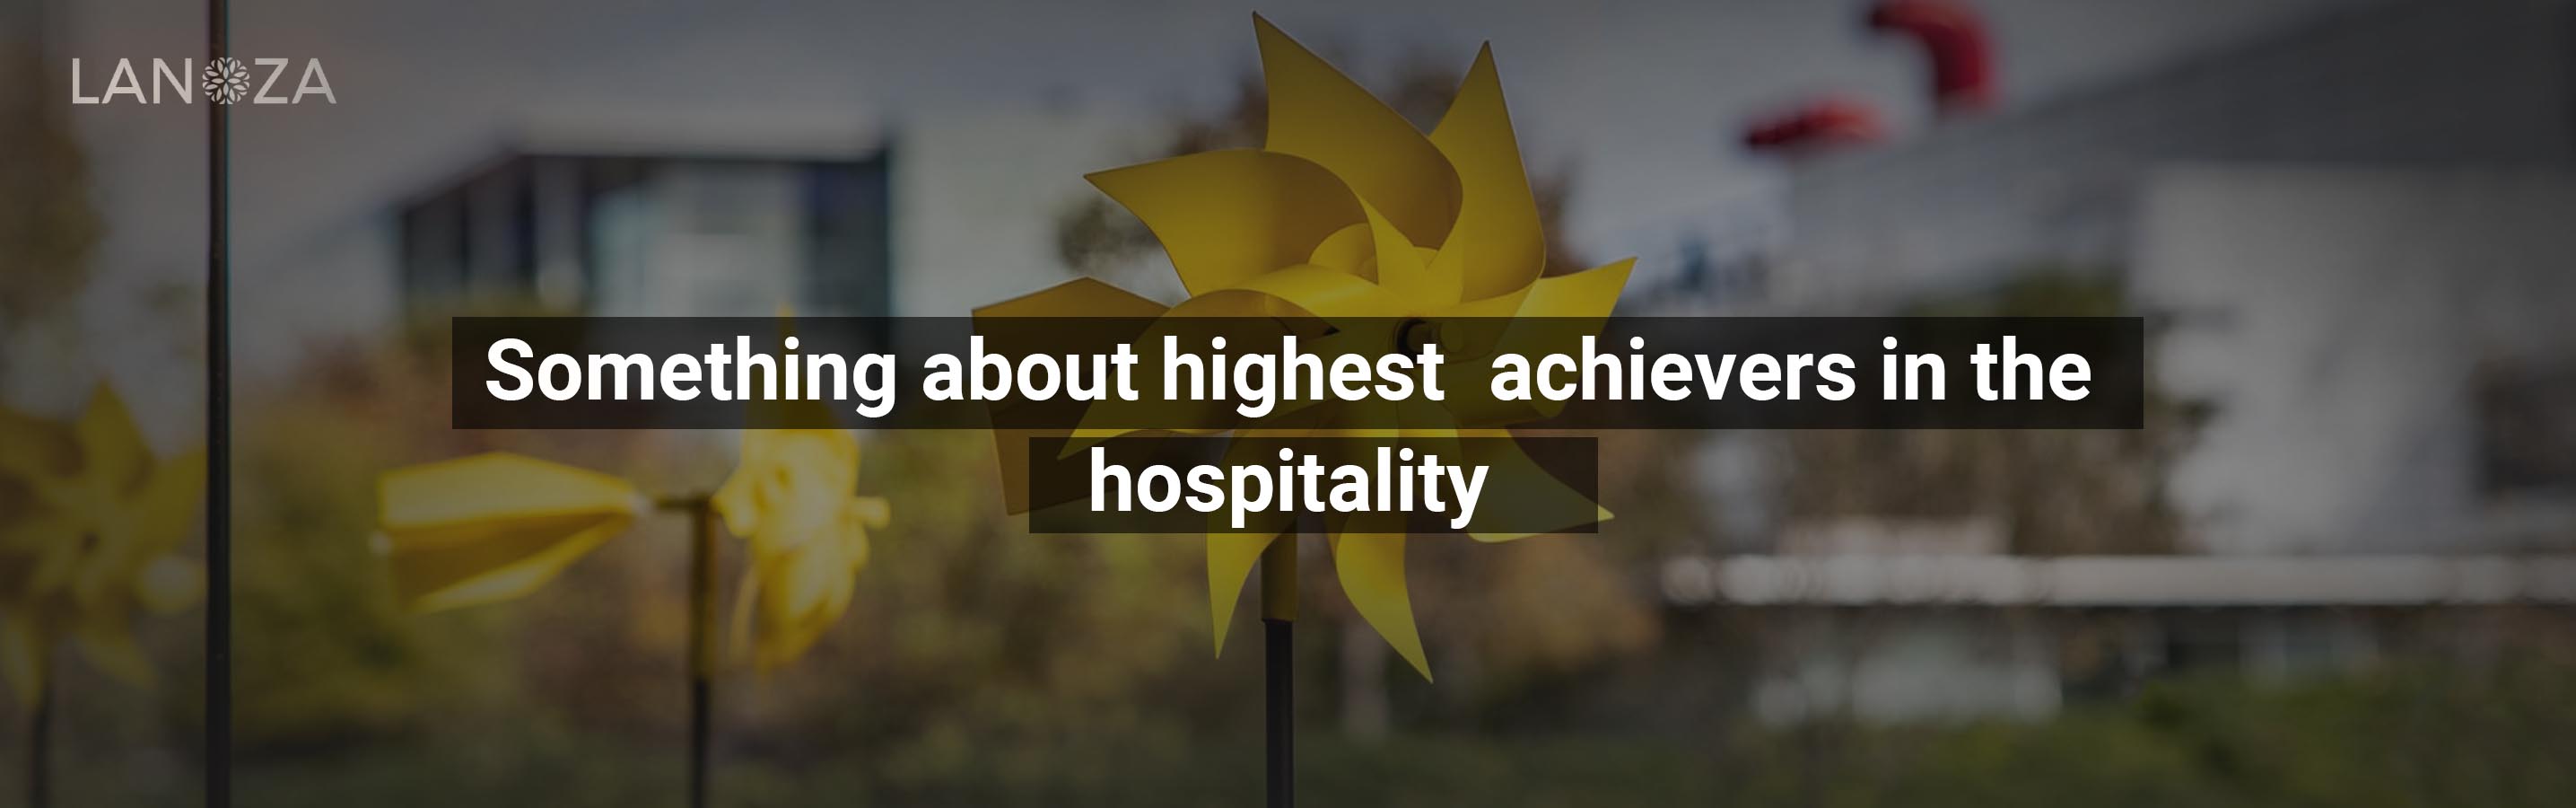 something-about-highest-achievers-in-the-hospitality